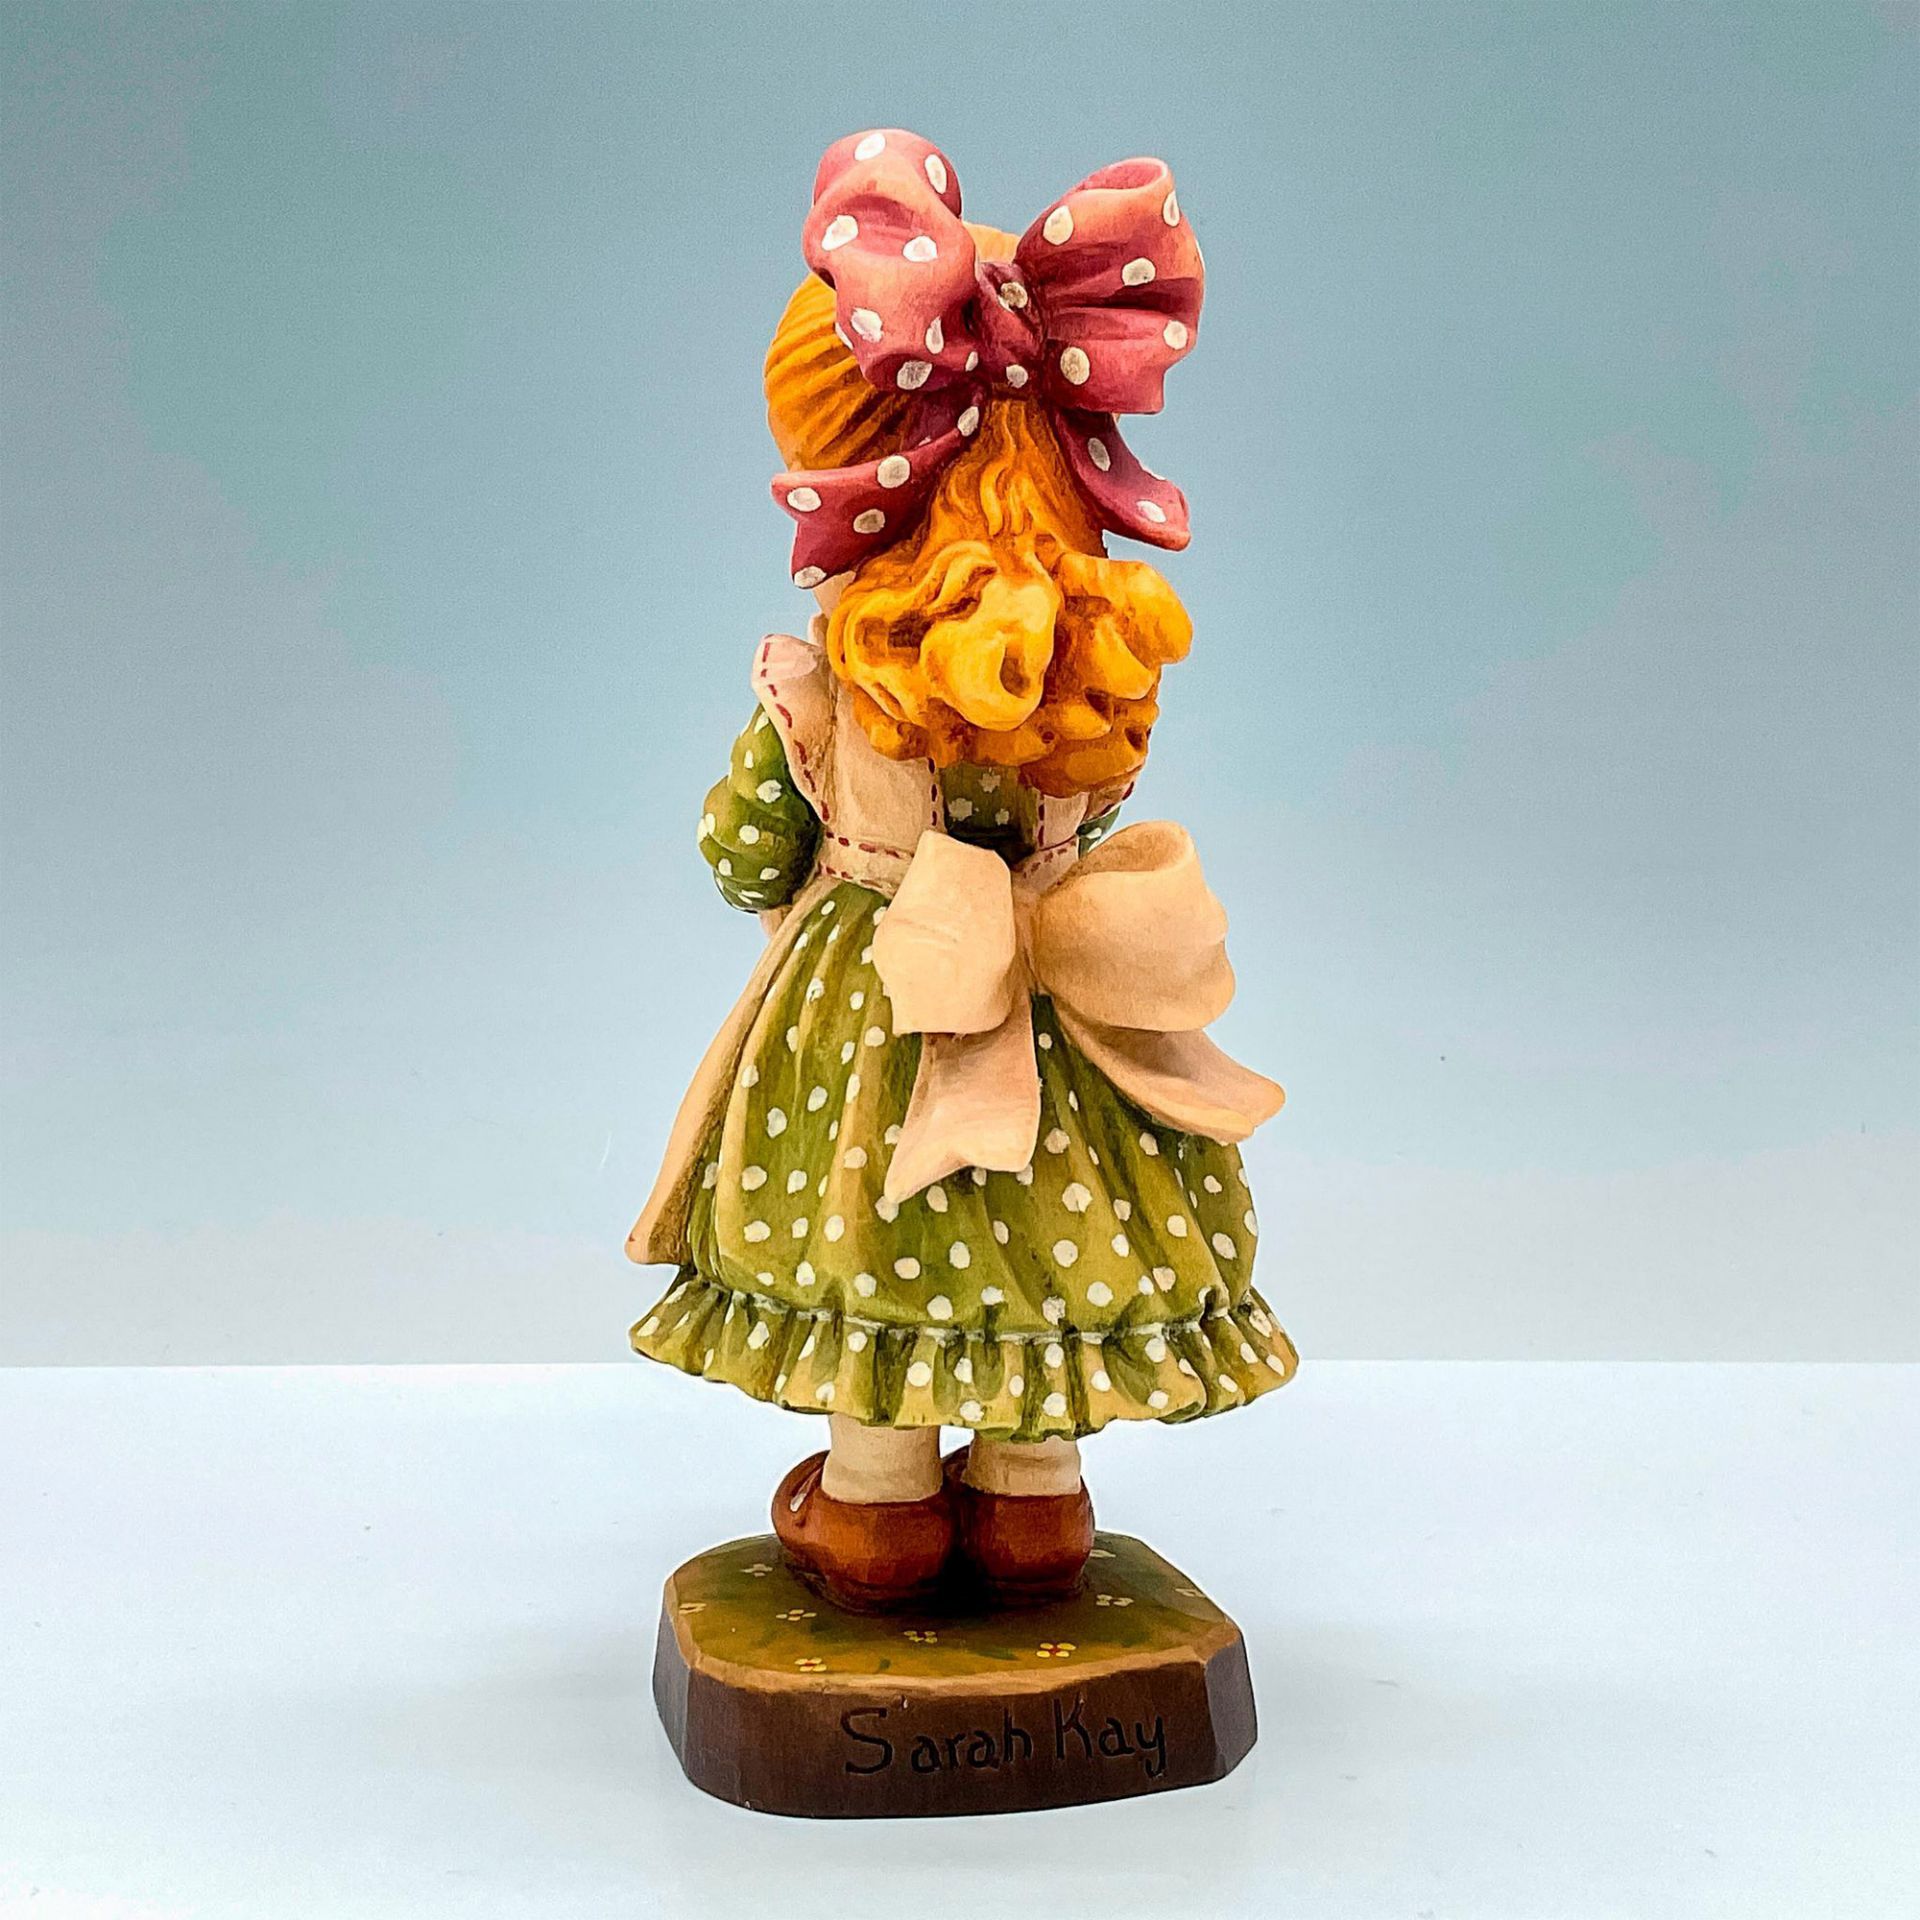 Anri Italy Wood Carved Figurine, Spring Delight - Image 2 of 3